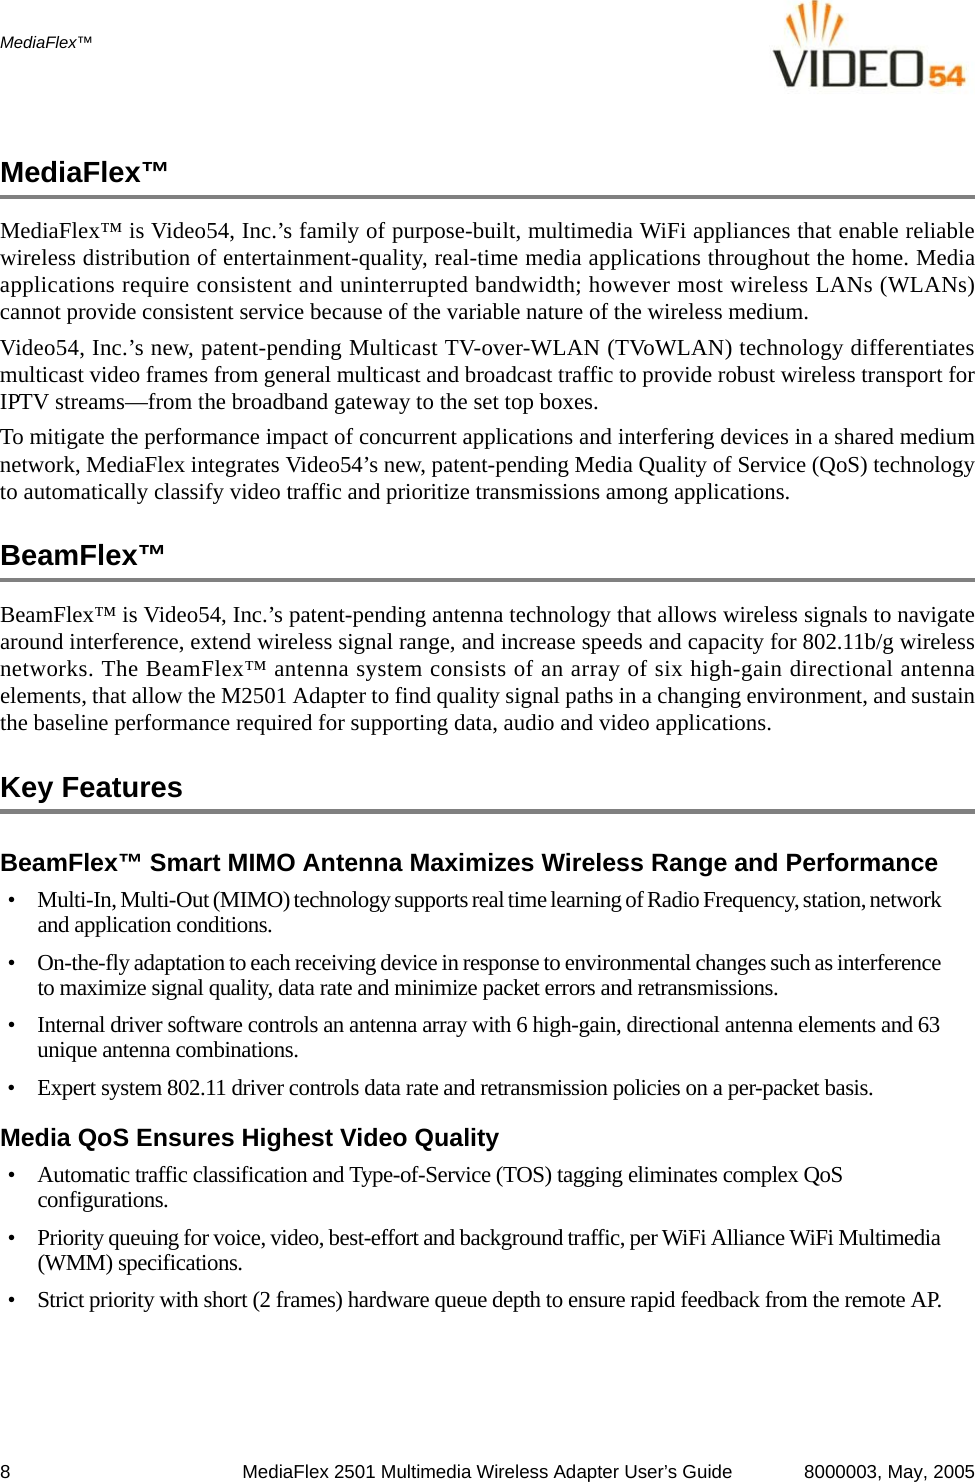 8 MediaFlex 2501 Multimedia Wireless Adapter User’s Guide 8000003, May, 2005MediaFlex™MediaFlex™MediaFlex™ is Video54, Inc.’s family of purpose-built, multimedia WiFi appliances that enable reliablewireless distribution of entertainment-quality, real-time media applications throughout the home. Mediaapplications require consistent and uninterrupted bandwidth; however most wireless LANs (WLANs)cannot provide consistent service because of the variable nature of the wireless medium. Video54, Inc.’s new, patent-pending Multicast TV-over-WLAN (TVoWLAN) technology differentiatesmulticast video frames from general multicast and broadcast traffic to provide robust wireless transport forIPTV streams—from the broadband gateway to the set top boxes. To mitigate the performance impact of concurrent applications and interfering devices in a shared mediumnetwork, MediaFlex integrates Video54’s new, patent-pending Media Quality of Service (QoS) technologyto automatically classify video traffic and prioritize transmissions among applications. BeamFlex™ BeamFlex™ is Video54, Inc.’s patent-pending antenna technology that allows wireless signals to navigatearound interference, extend wireless signal range, and increase speeds and capacity for 802.11b/g wirelessnetworks. The BeamFlex™ antenna system consists of an array of six high-gain directional antennaelements, that allow the M2501 Adapter to find quality signal paths in a changing environment, and sustainthe baseline performance required for supporting data, audio and video applications. Key FeaturesBeamFlex™ Smart MIMO Antenna Maximizes Wireless Range and Performance• Multi-In, Multi-Out (MIMO) technology supports real time learning of Radio Frequency, station, network and application conditions.• On-the-fly adaptation to each receiving device in response to environmental changes such as interference to maximize signal quality, data rate and minimize packet errors and retransmissions.• Internal driver software controls an antenna array with 6 high-gain, directional antenna elements and 63 unique antenna combinations. • Expert system 802.11 driver controls data rate and retransmission policies on a per-packet basis.Media QoS Ensures Highest Video Quality• Automatic traffic classification and Type-of-Service (TOS) tagging eliminates complex QoS configurations. • Priority queuing for voice, video, best-effort and background traffic, per WiFi Alliance WiFi Multimedia (WMM) specifications.• Strict priority with short (2 frames) hardware queue depth to ensure rapid feedback from the remote AP.